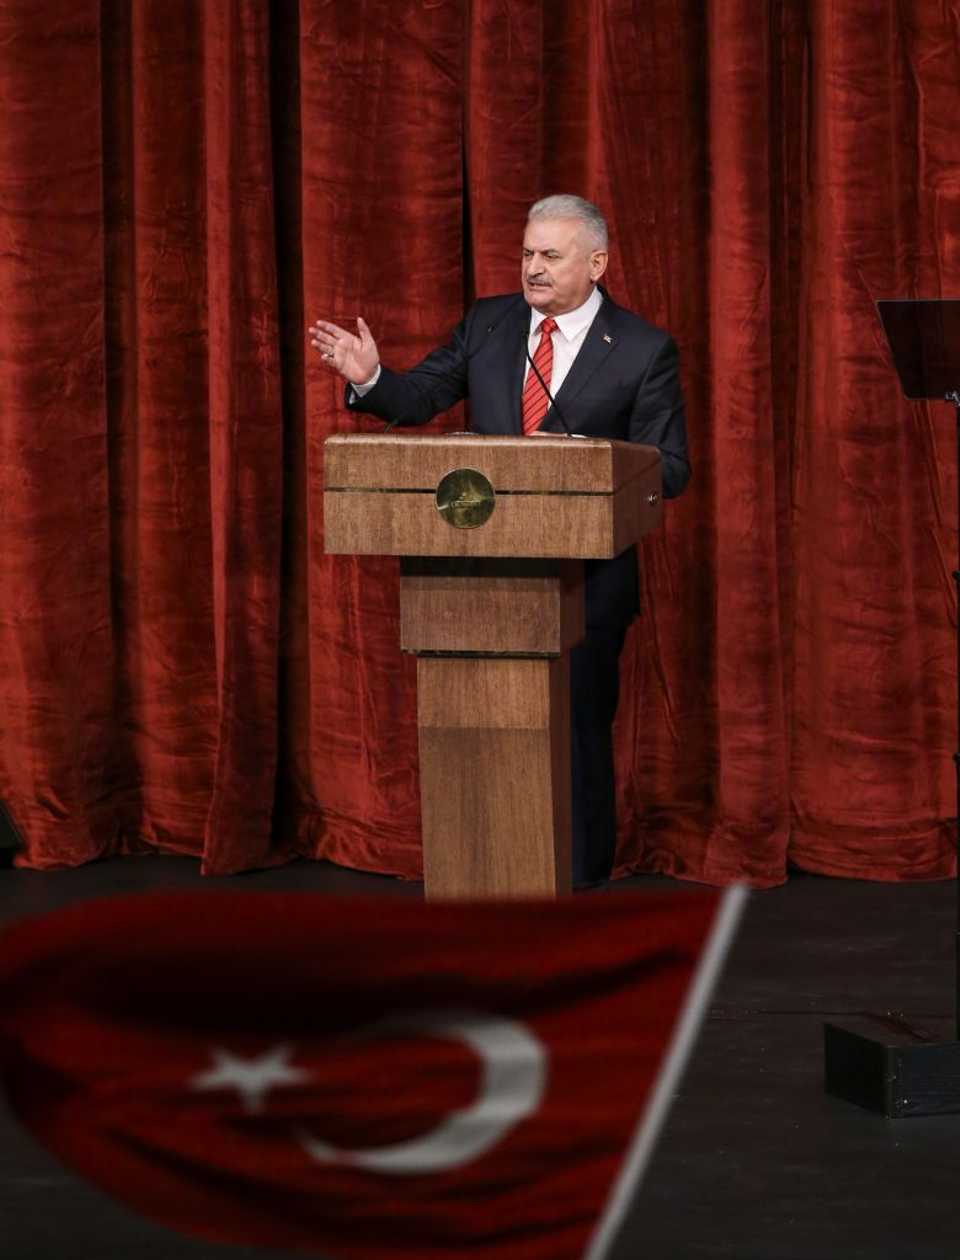 Turkish Prime Minister Binali Yildrim delivers speech opening ceremony of Bestepe National Congress & Culture Center and commemoration of those martyred in July 15 coup attempt, in Ankara, Turkey on July 29, 2016.